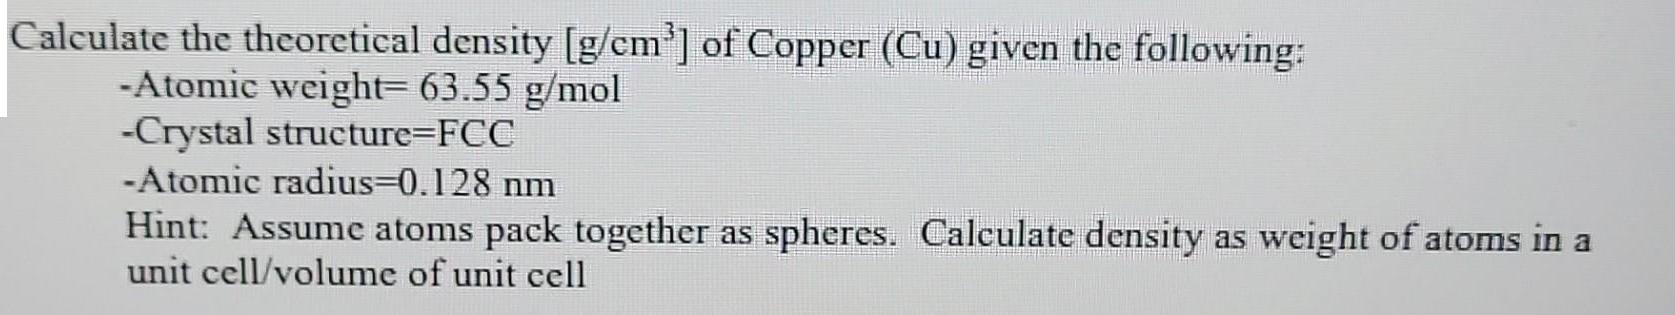 Calculate the theoretical density [g/cm] of Copper (Cu) given the following: -Atomic weight= 63.55 g/mol